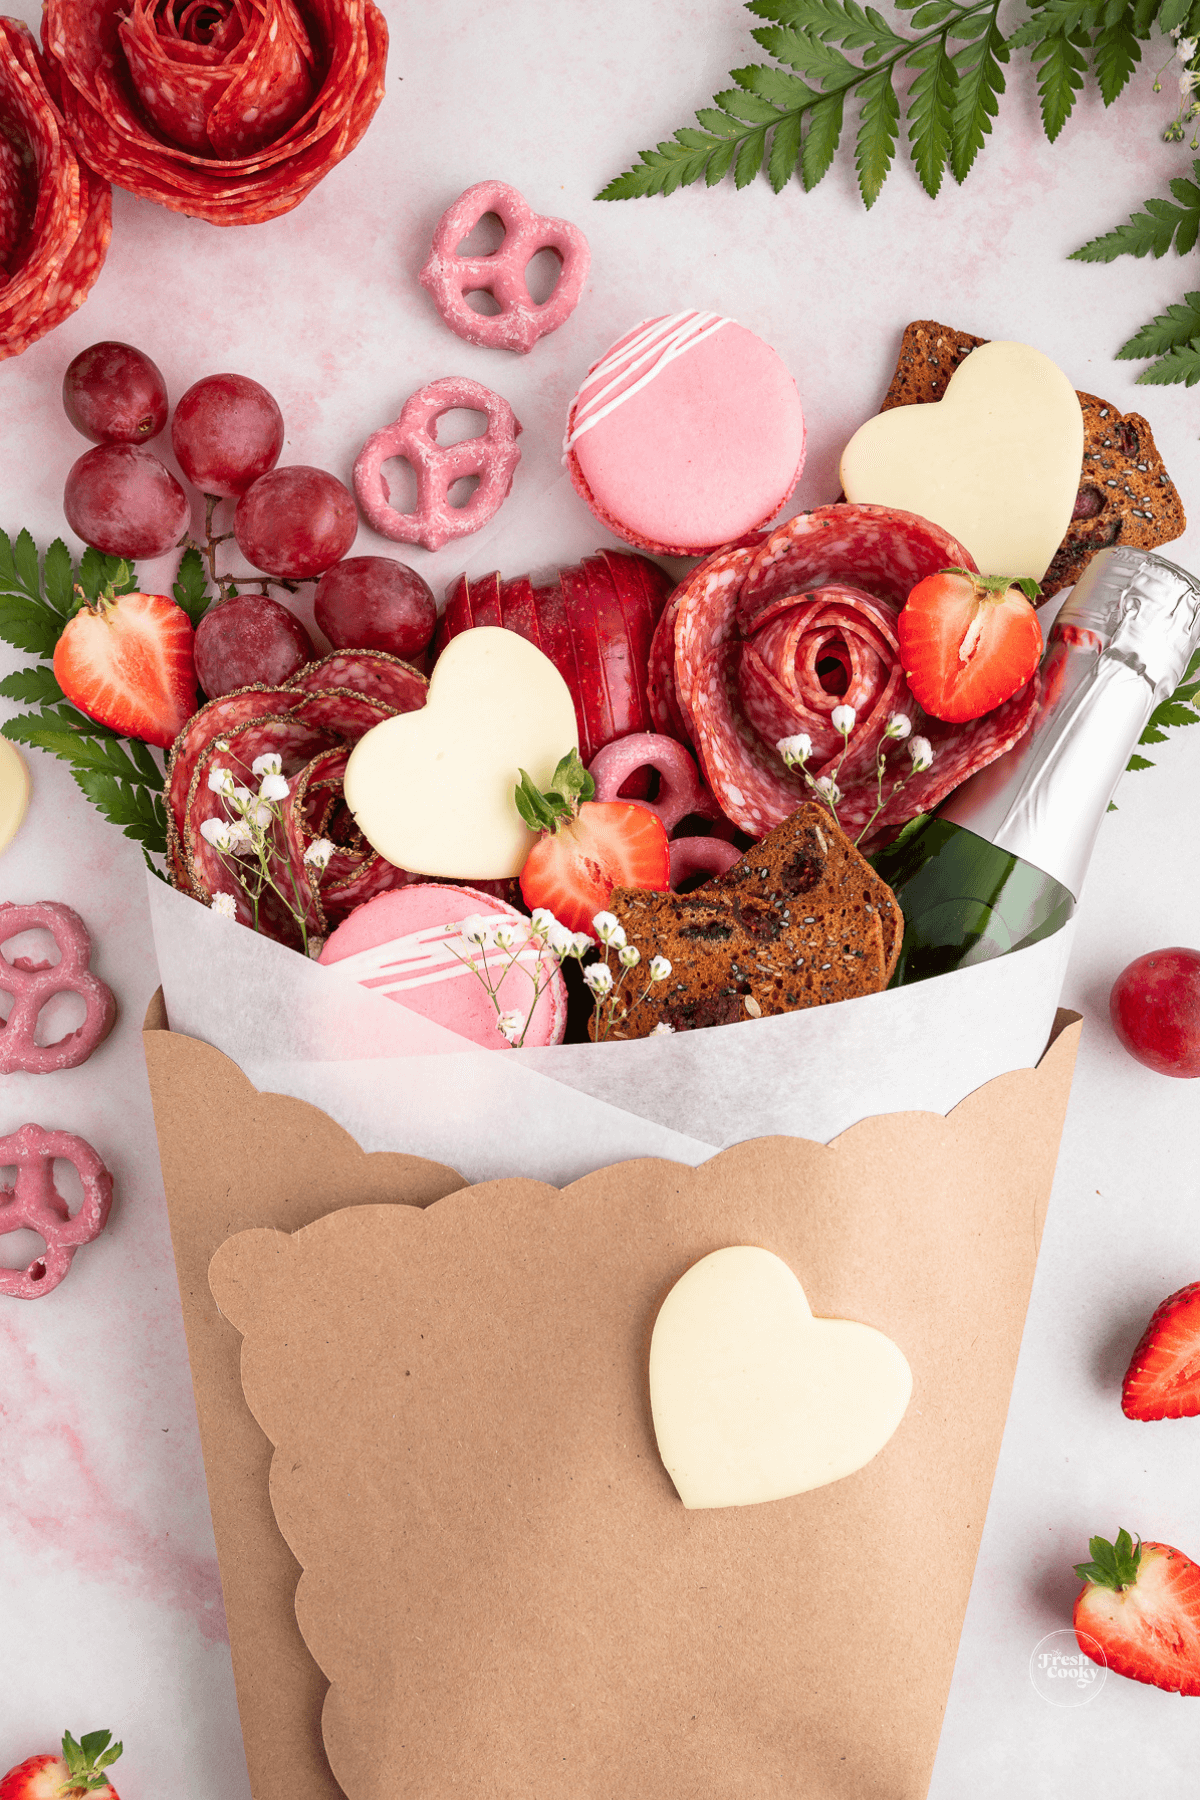 Charcuterie Bouquet with salami hearts, champagne, cookies and more all pink and red.